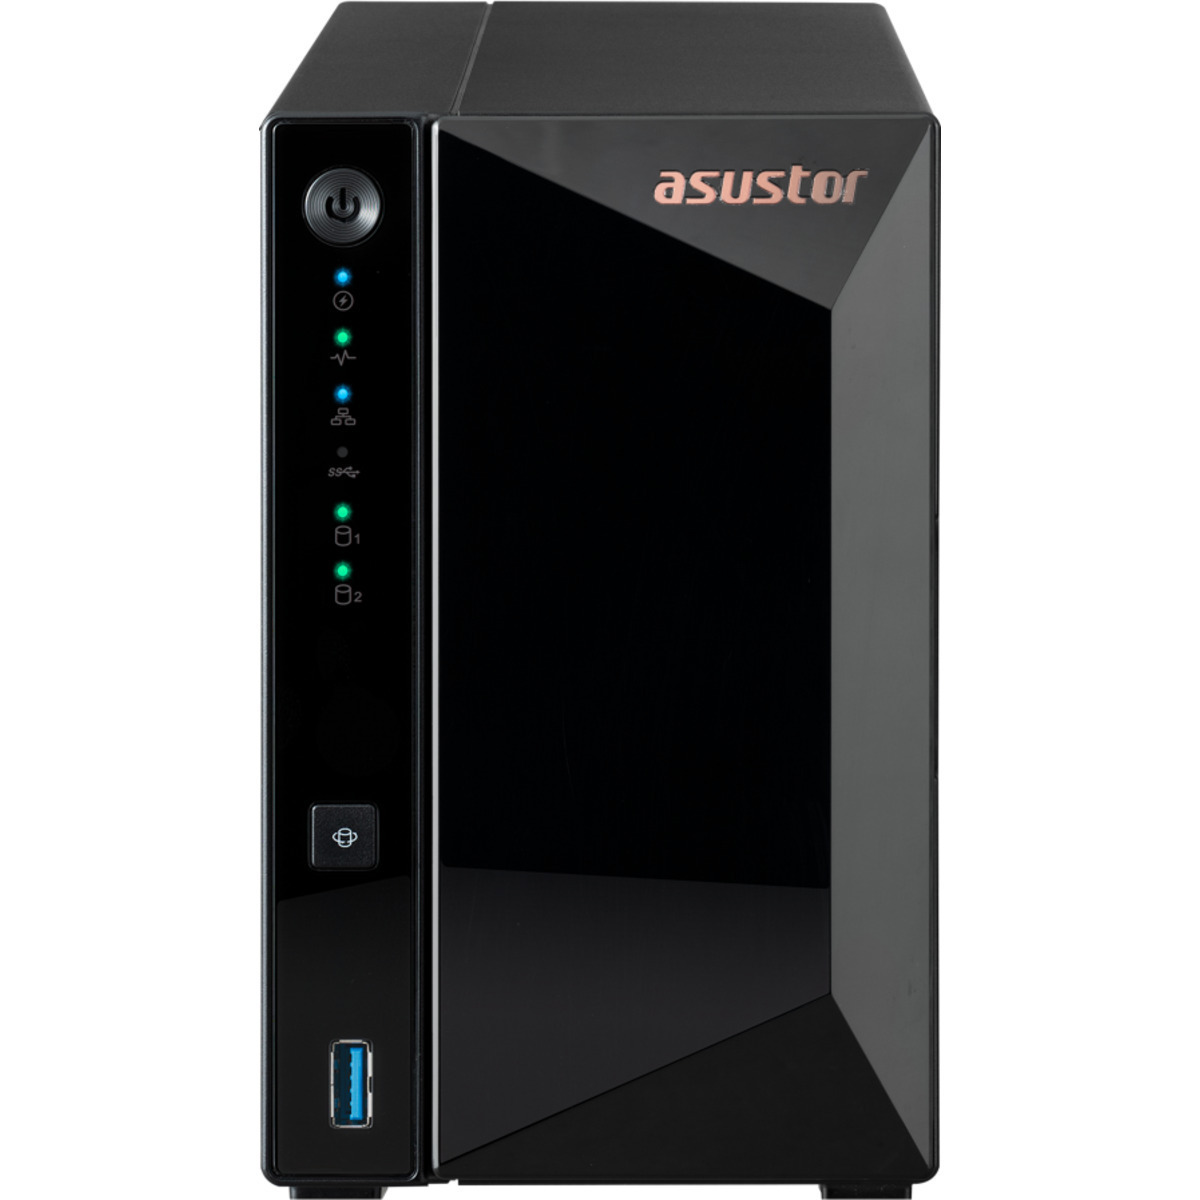 ASUSTOR DRIVESTOR 2 Pro AS3302T 2tb 2-Bay Desktop Personal / Basic Home / Small Office NAS - Network Attached Storage Device 1x2tb Sandisk Ultra 3D SDSSDH3-2T00 2.5 560/520MB/s SATA 6Gb/s SSD CONSUMER Class Drives Installed - Burn-In Tested DRIVESTOR 2 Pro AS3302T